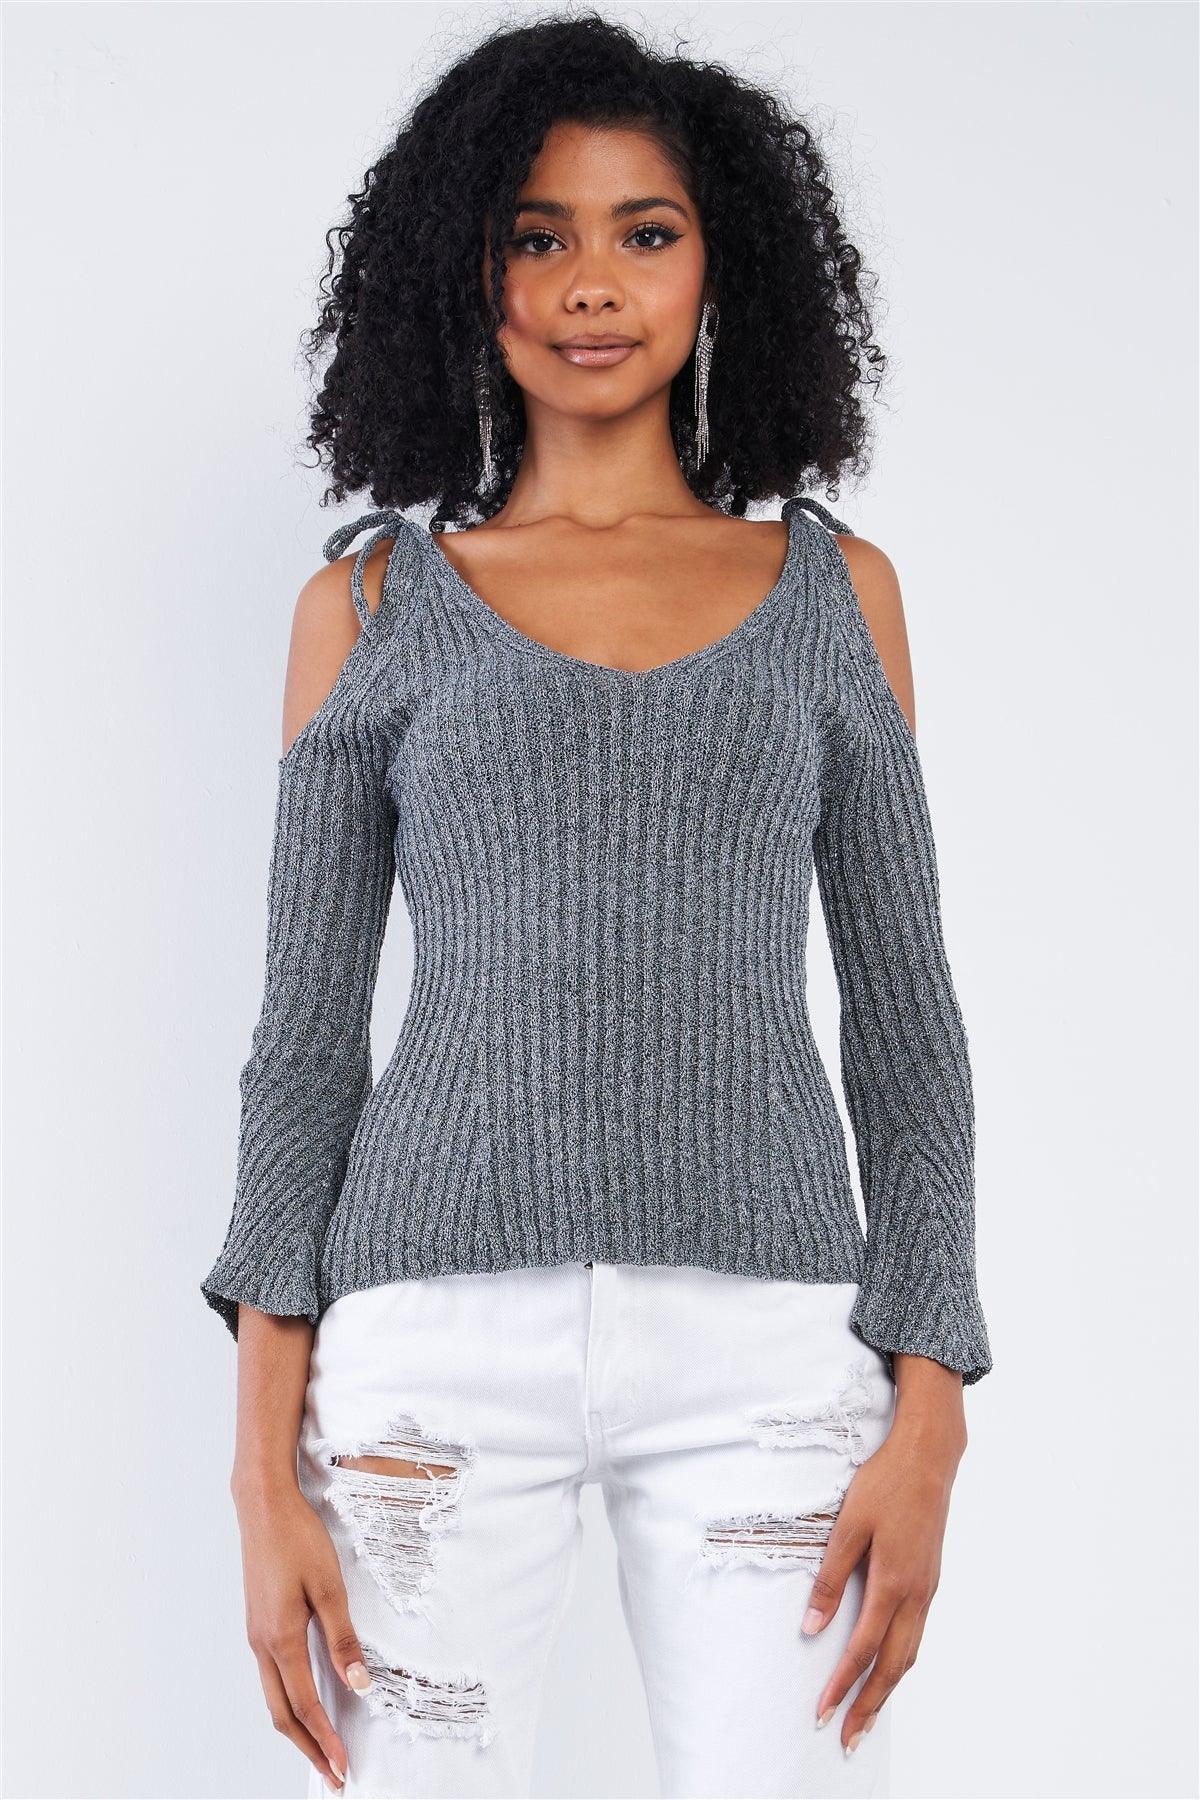 Concrete Grey Silver Tinsel Knitted Peek-A-Boo Self Tie Shoulder Top /2-2